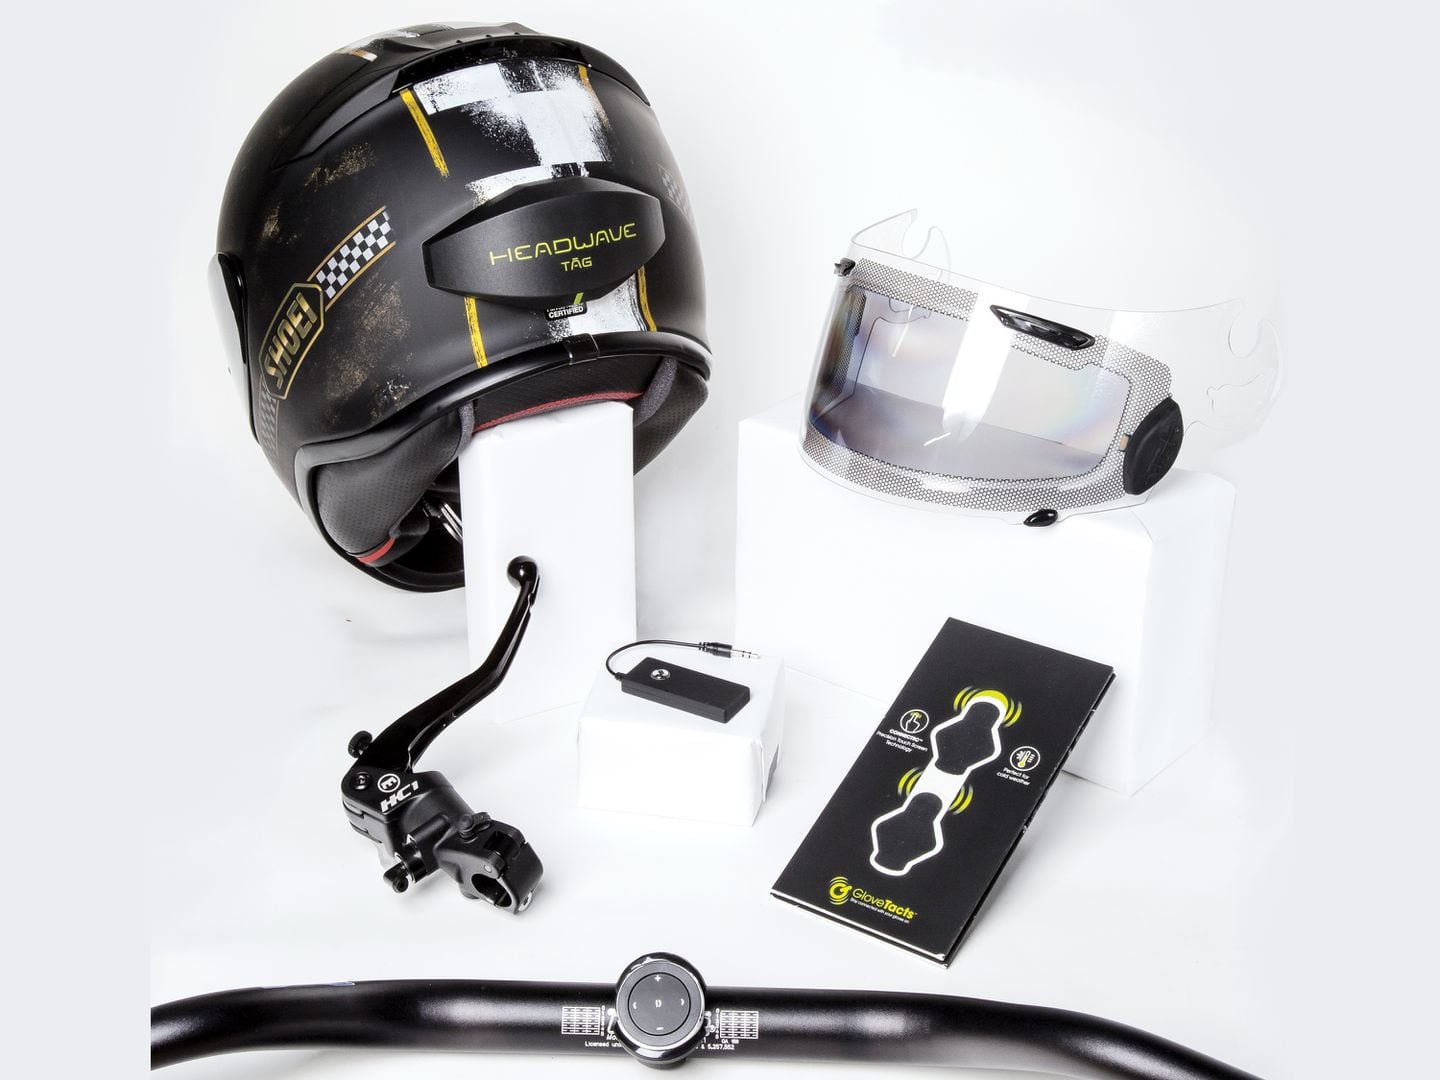 Motorcycle Accessories And Gadgets For You | Motorcyclist